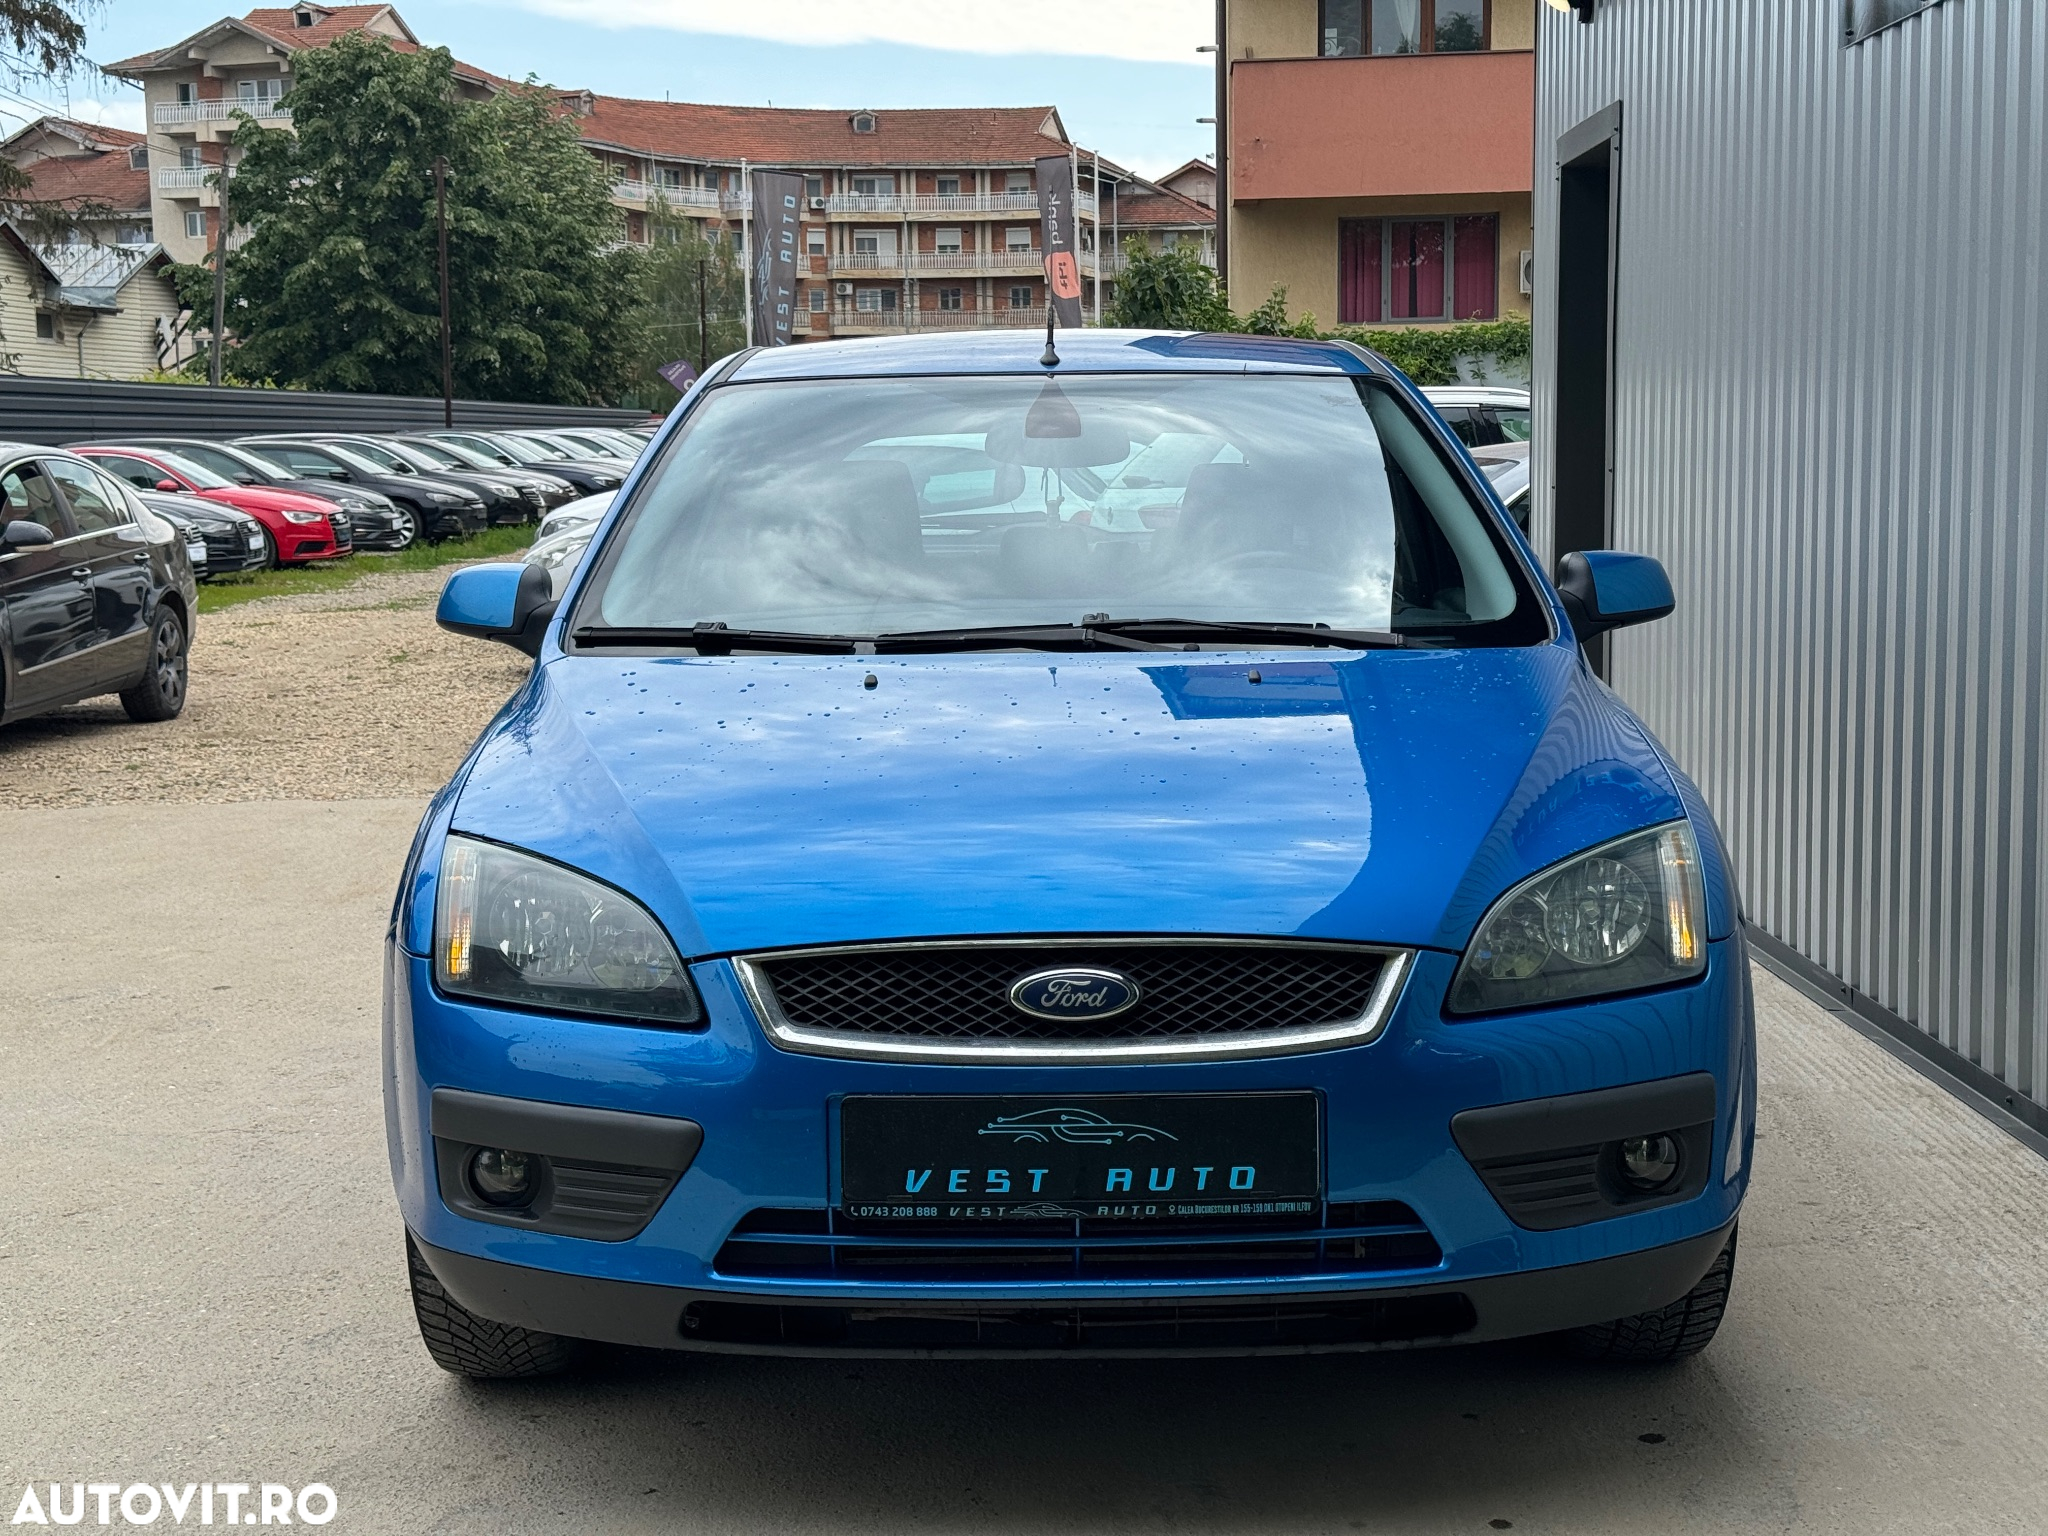 Ford Focus 1.6 TDCi DPF Style - 12